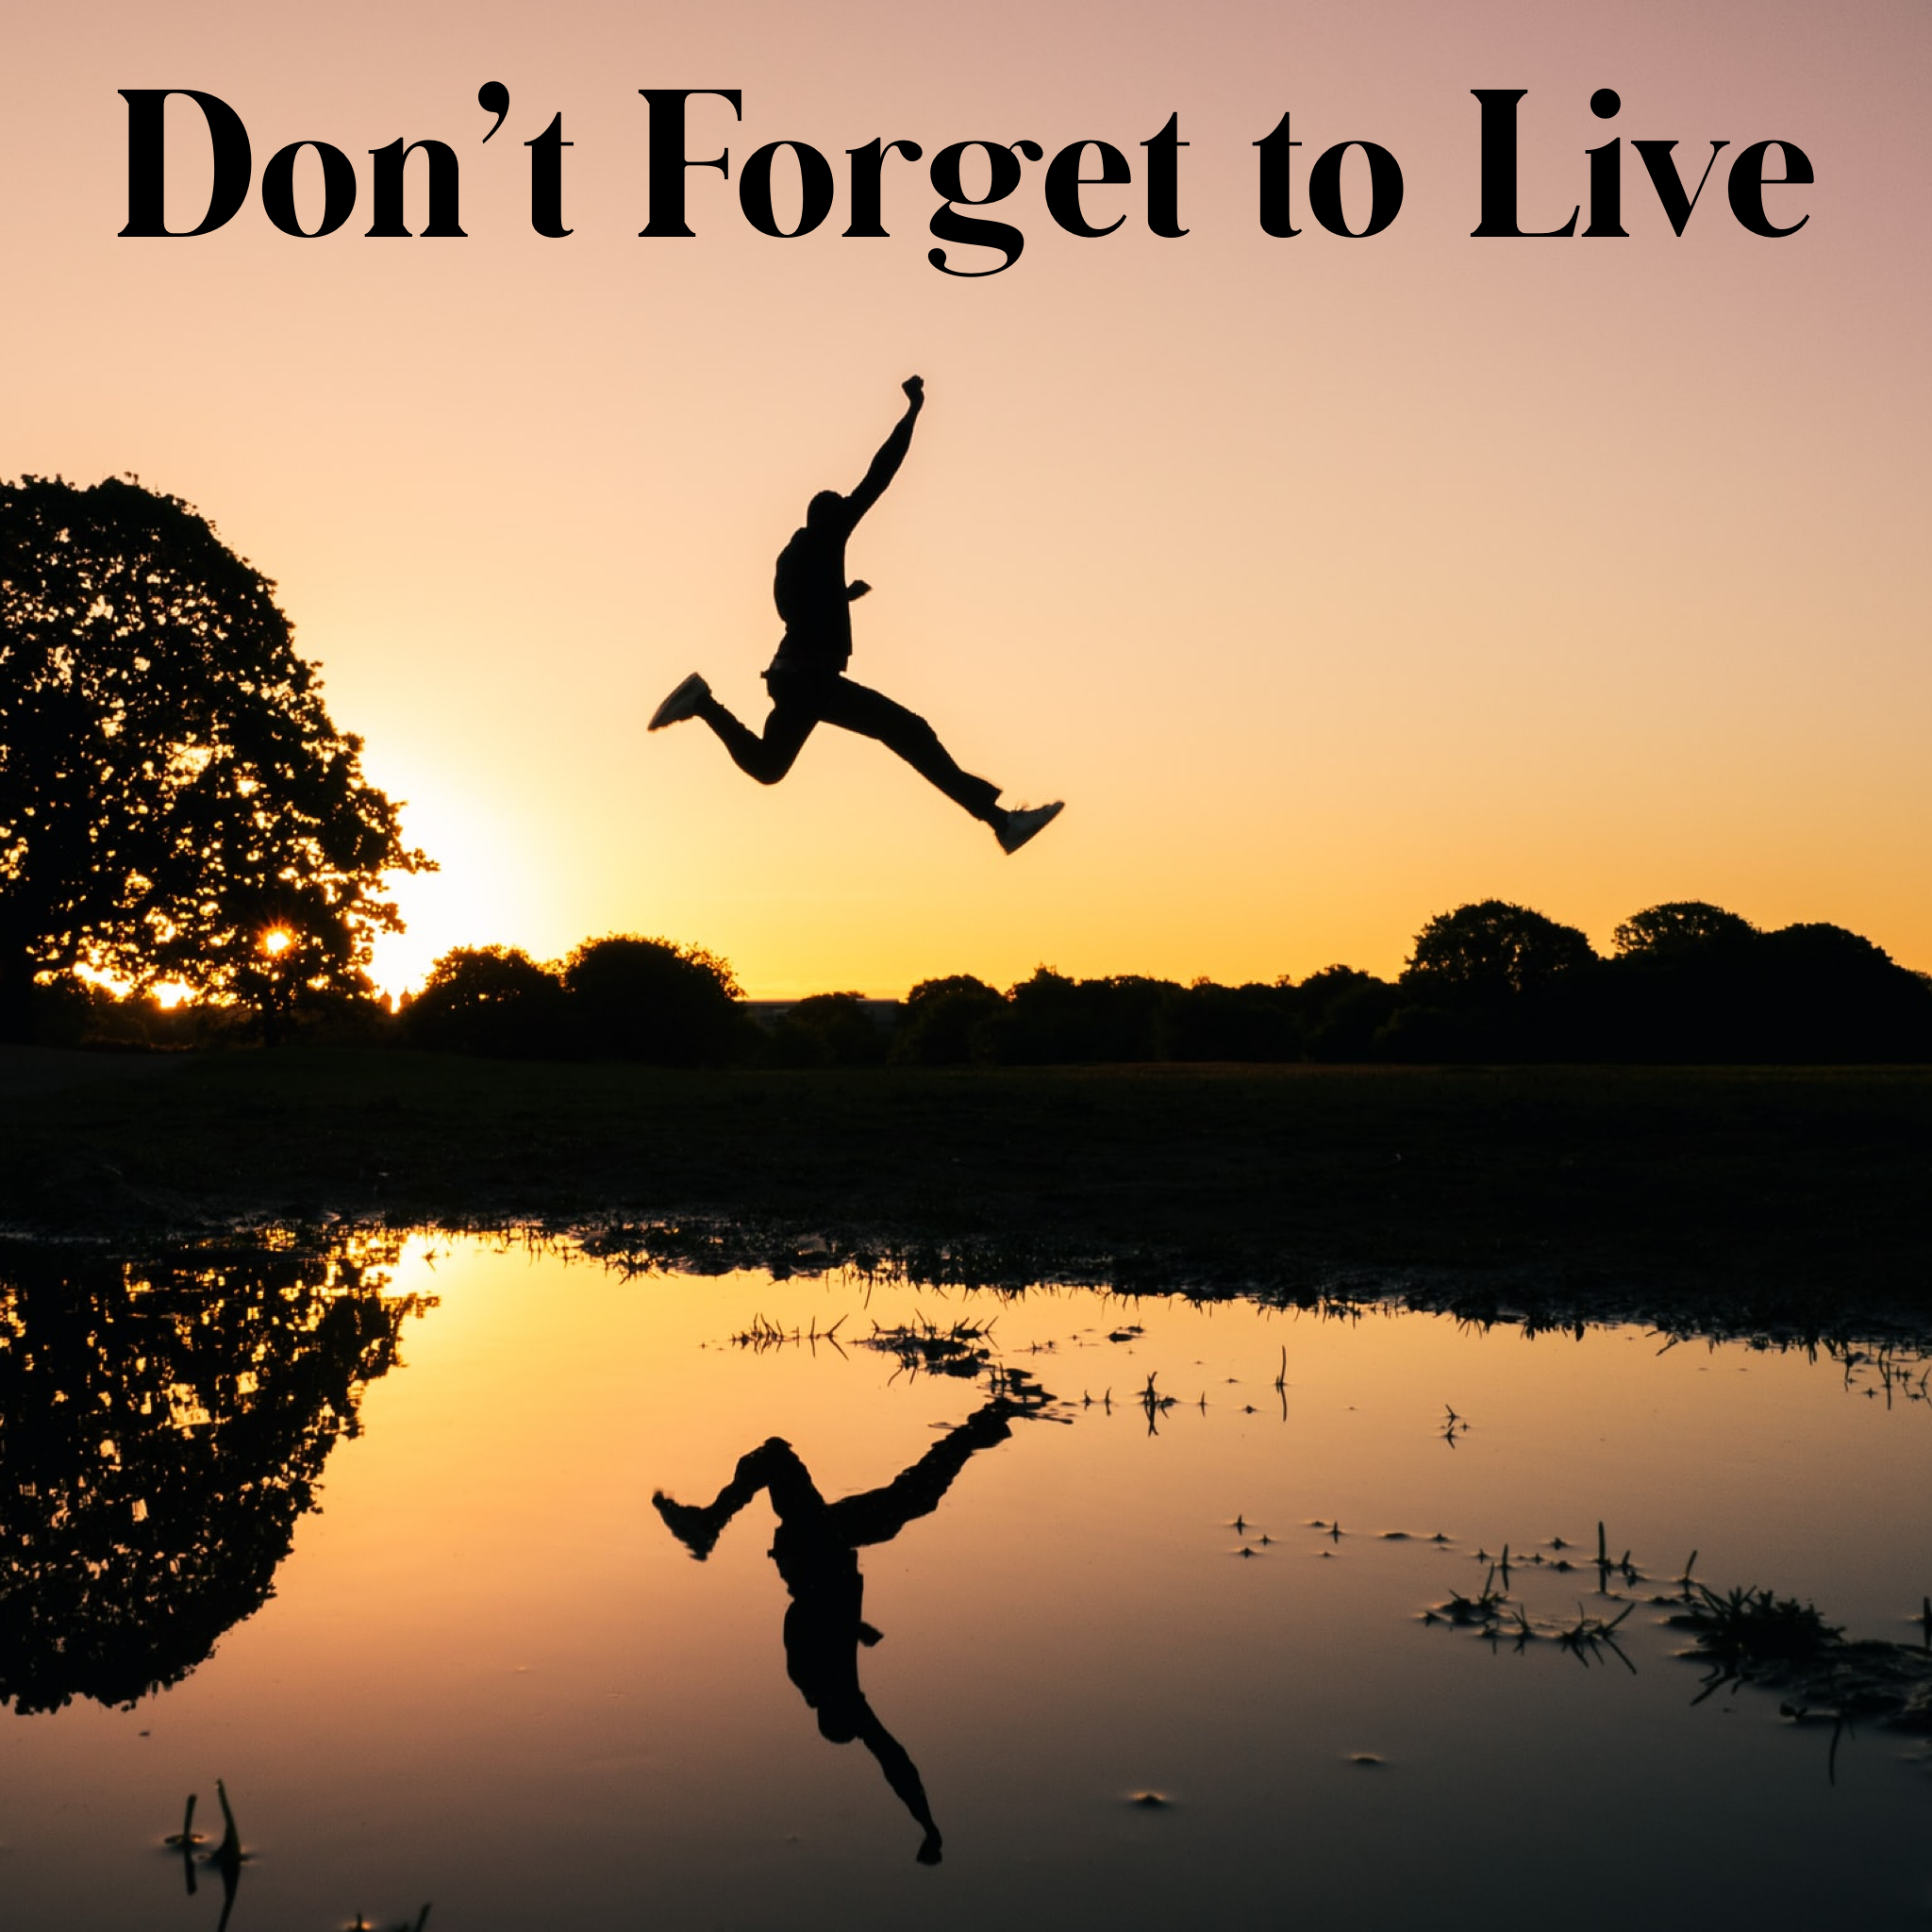 Don't Forget to Live - 1/24/21